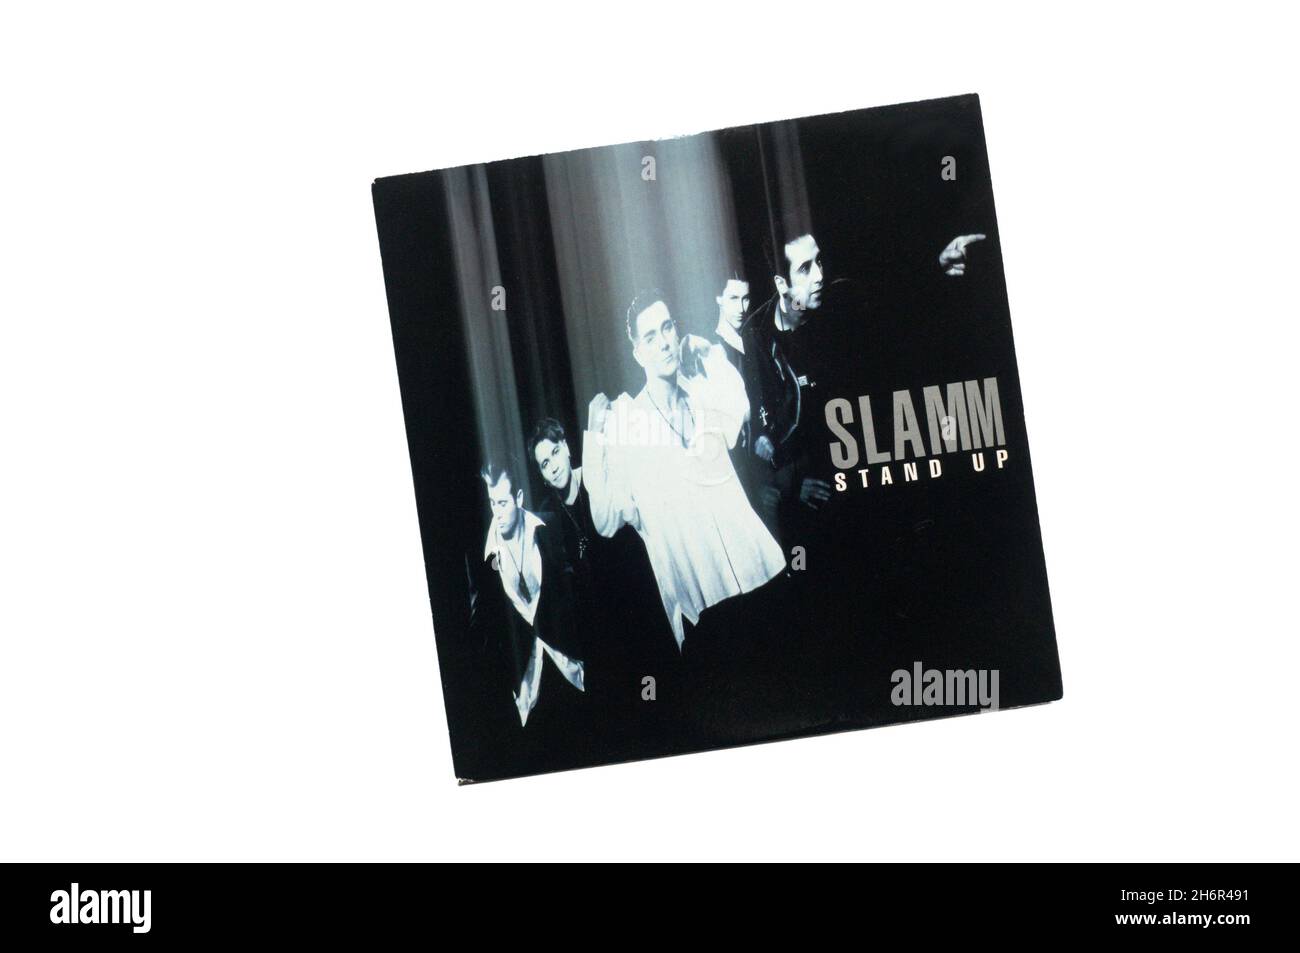 1994 7' single,Stand Up by Slamm. Stock Photo